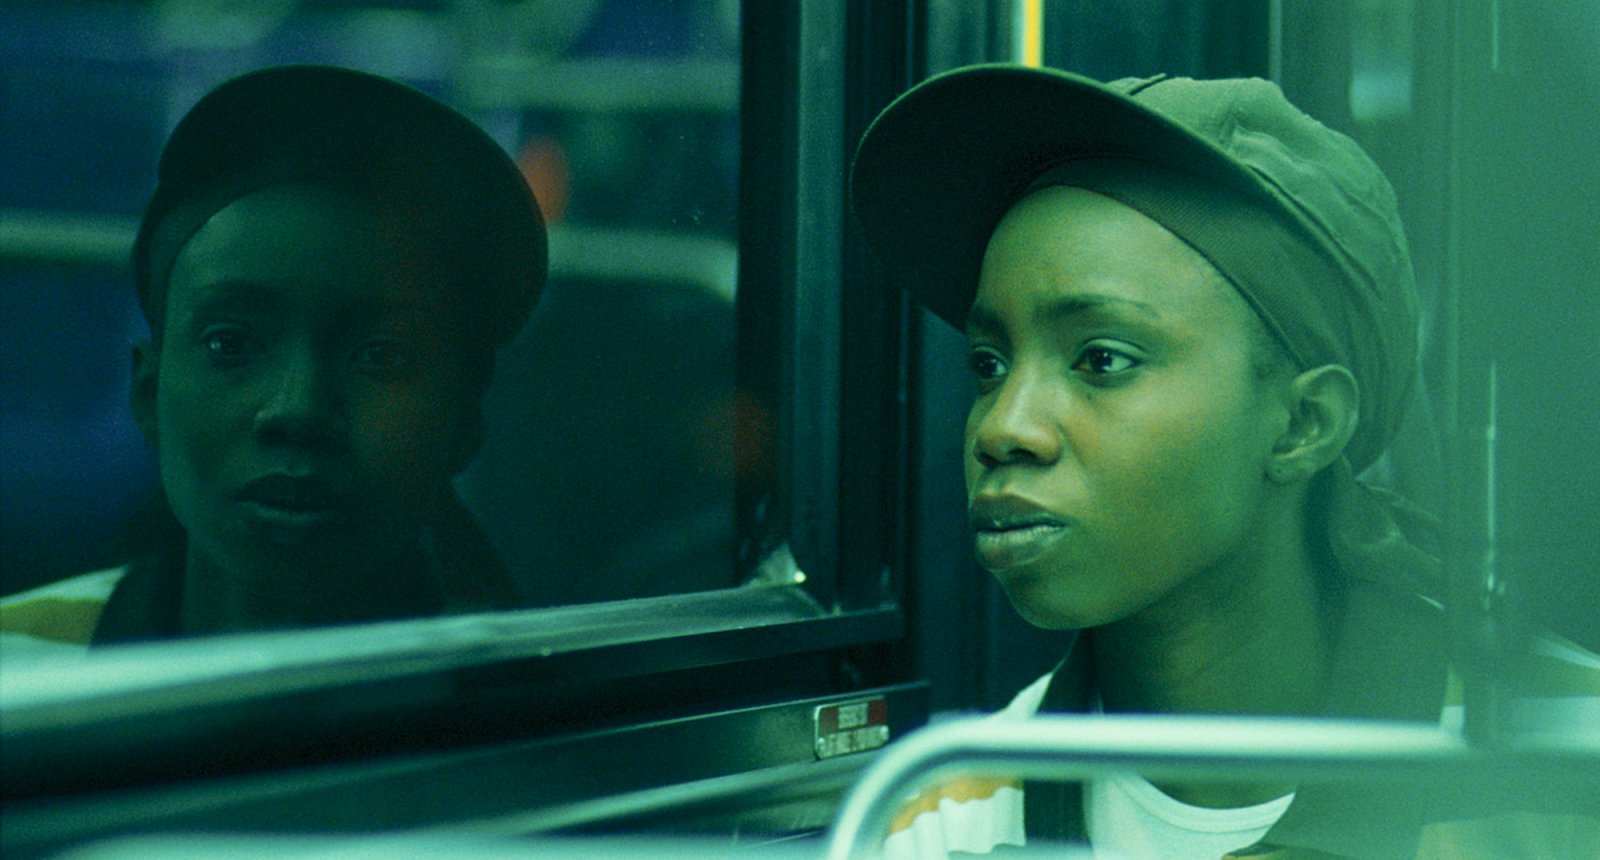 A Black woman in a baseball hat over a brown durag is sitting on a bus. She is looking seriously out the window, and her reflection in the bus window is looking at the viewer of the image. The overall lighting of the image is green, with additional texture on the right side of the image.